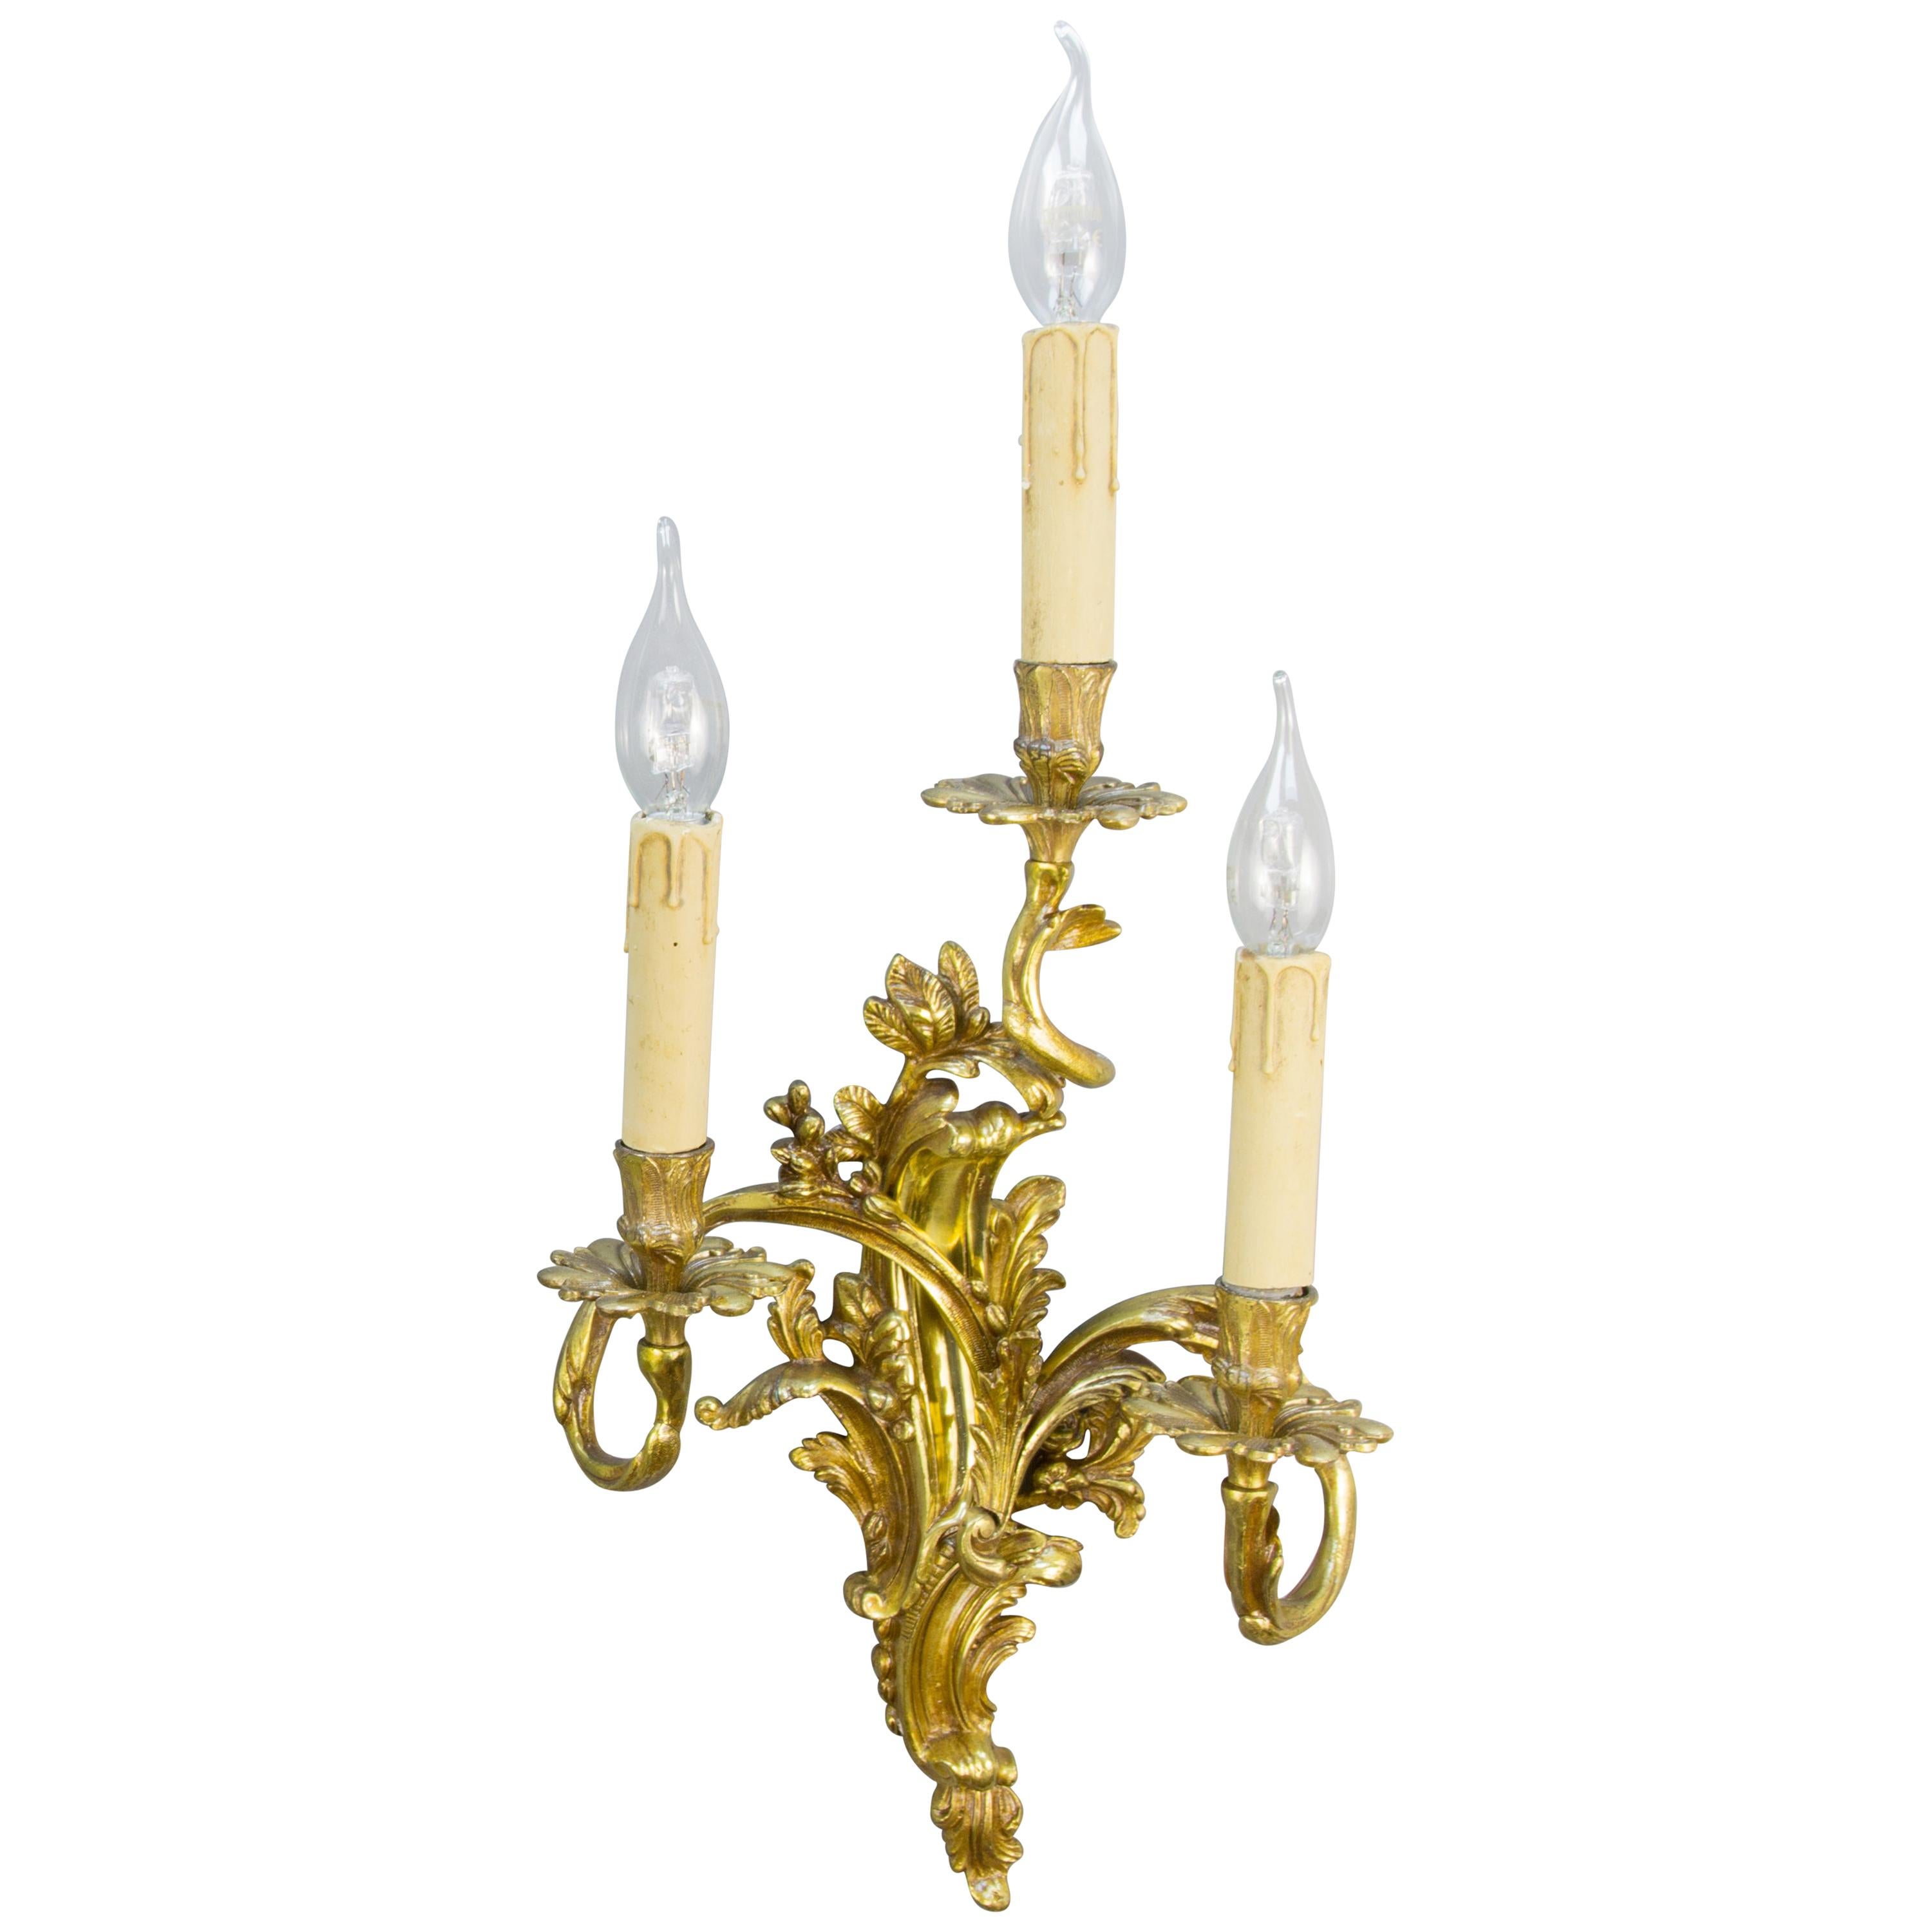 French Louis XV or Rococo Style Gilt Bronze Three-Light Sconce For Sale